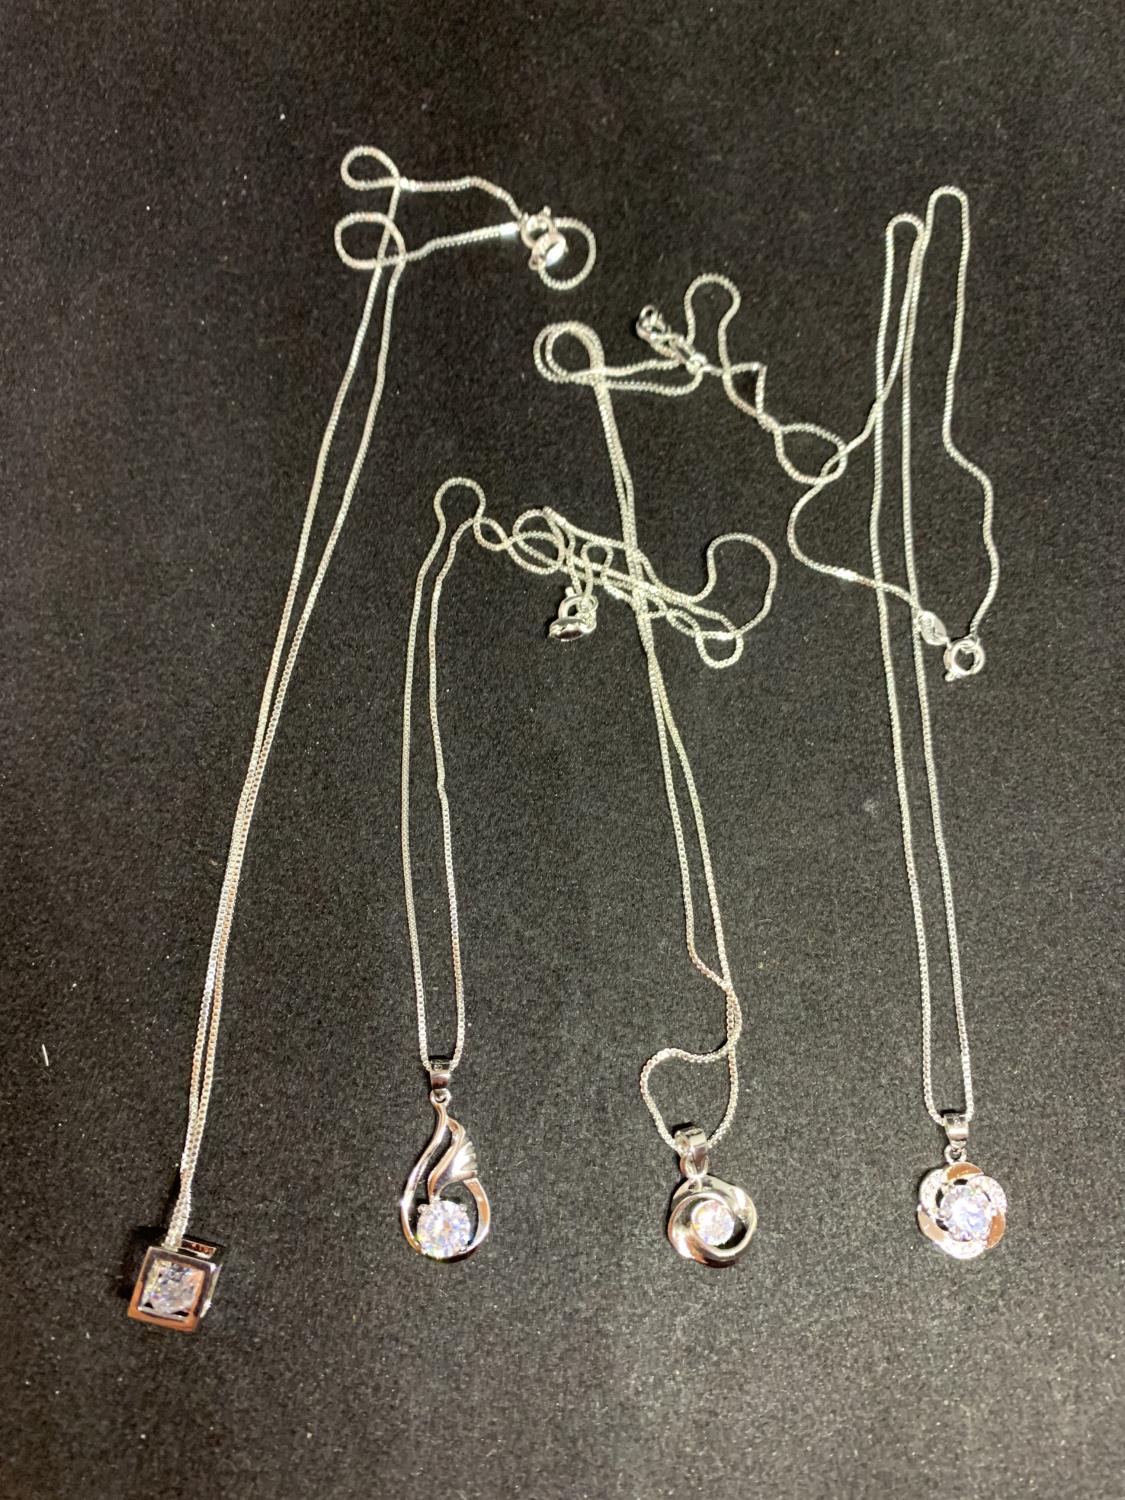 FOUR SILVER NECKLACES WITH PENDANTS TO INCLUDE A CUBE, TWIST, FLOWER ETC WITH CLEAR STONES - Image 2 of 6